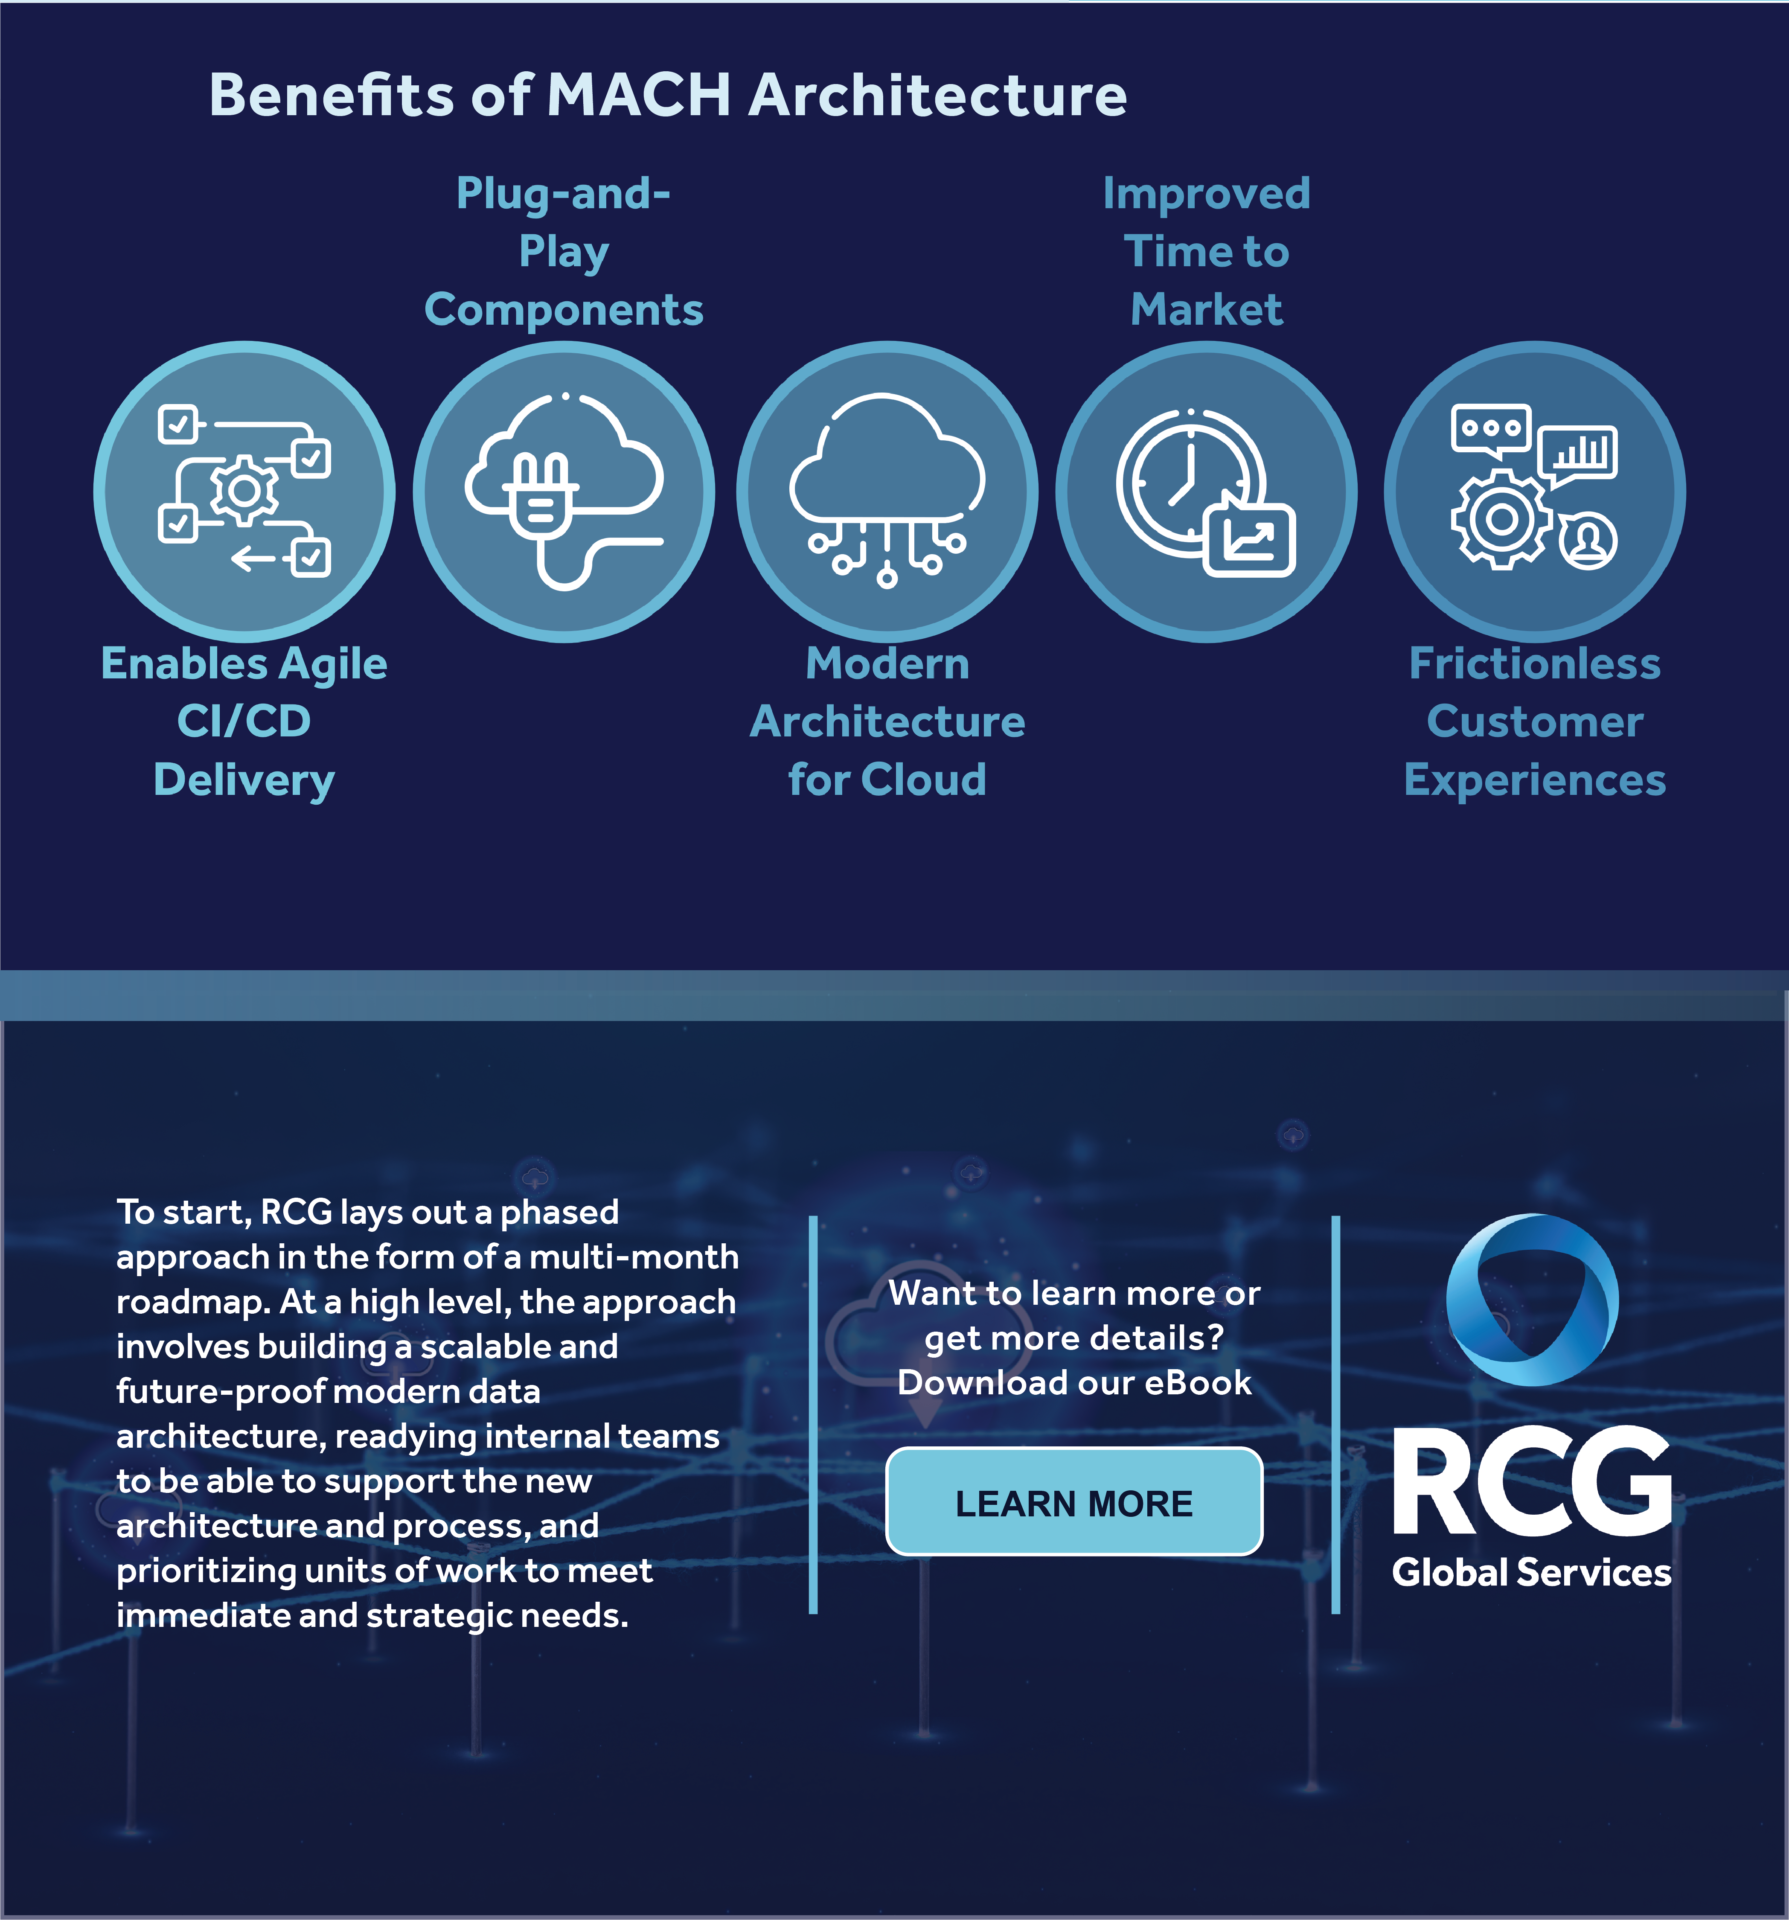 The benefits of MACH Architecture